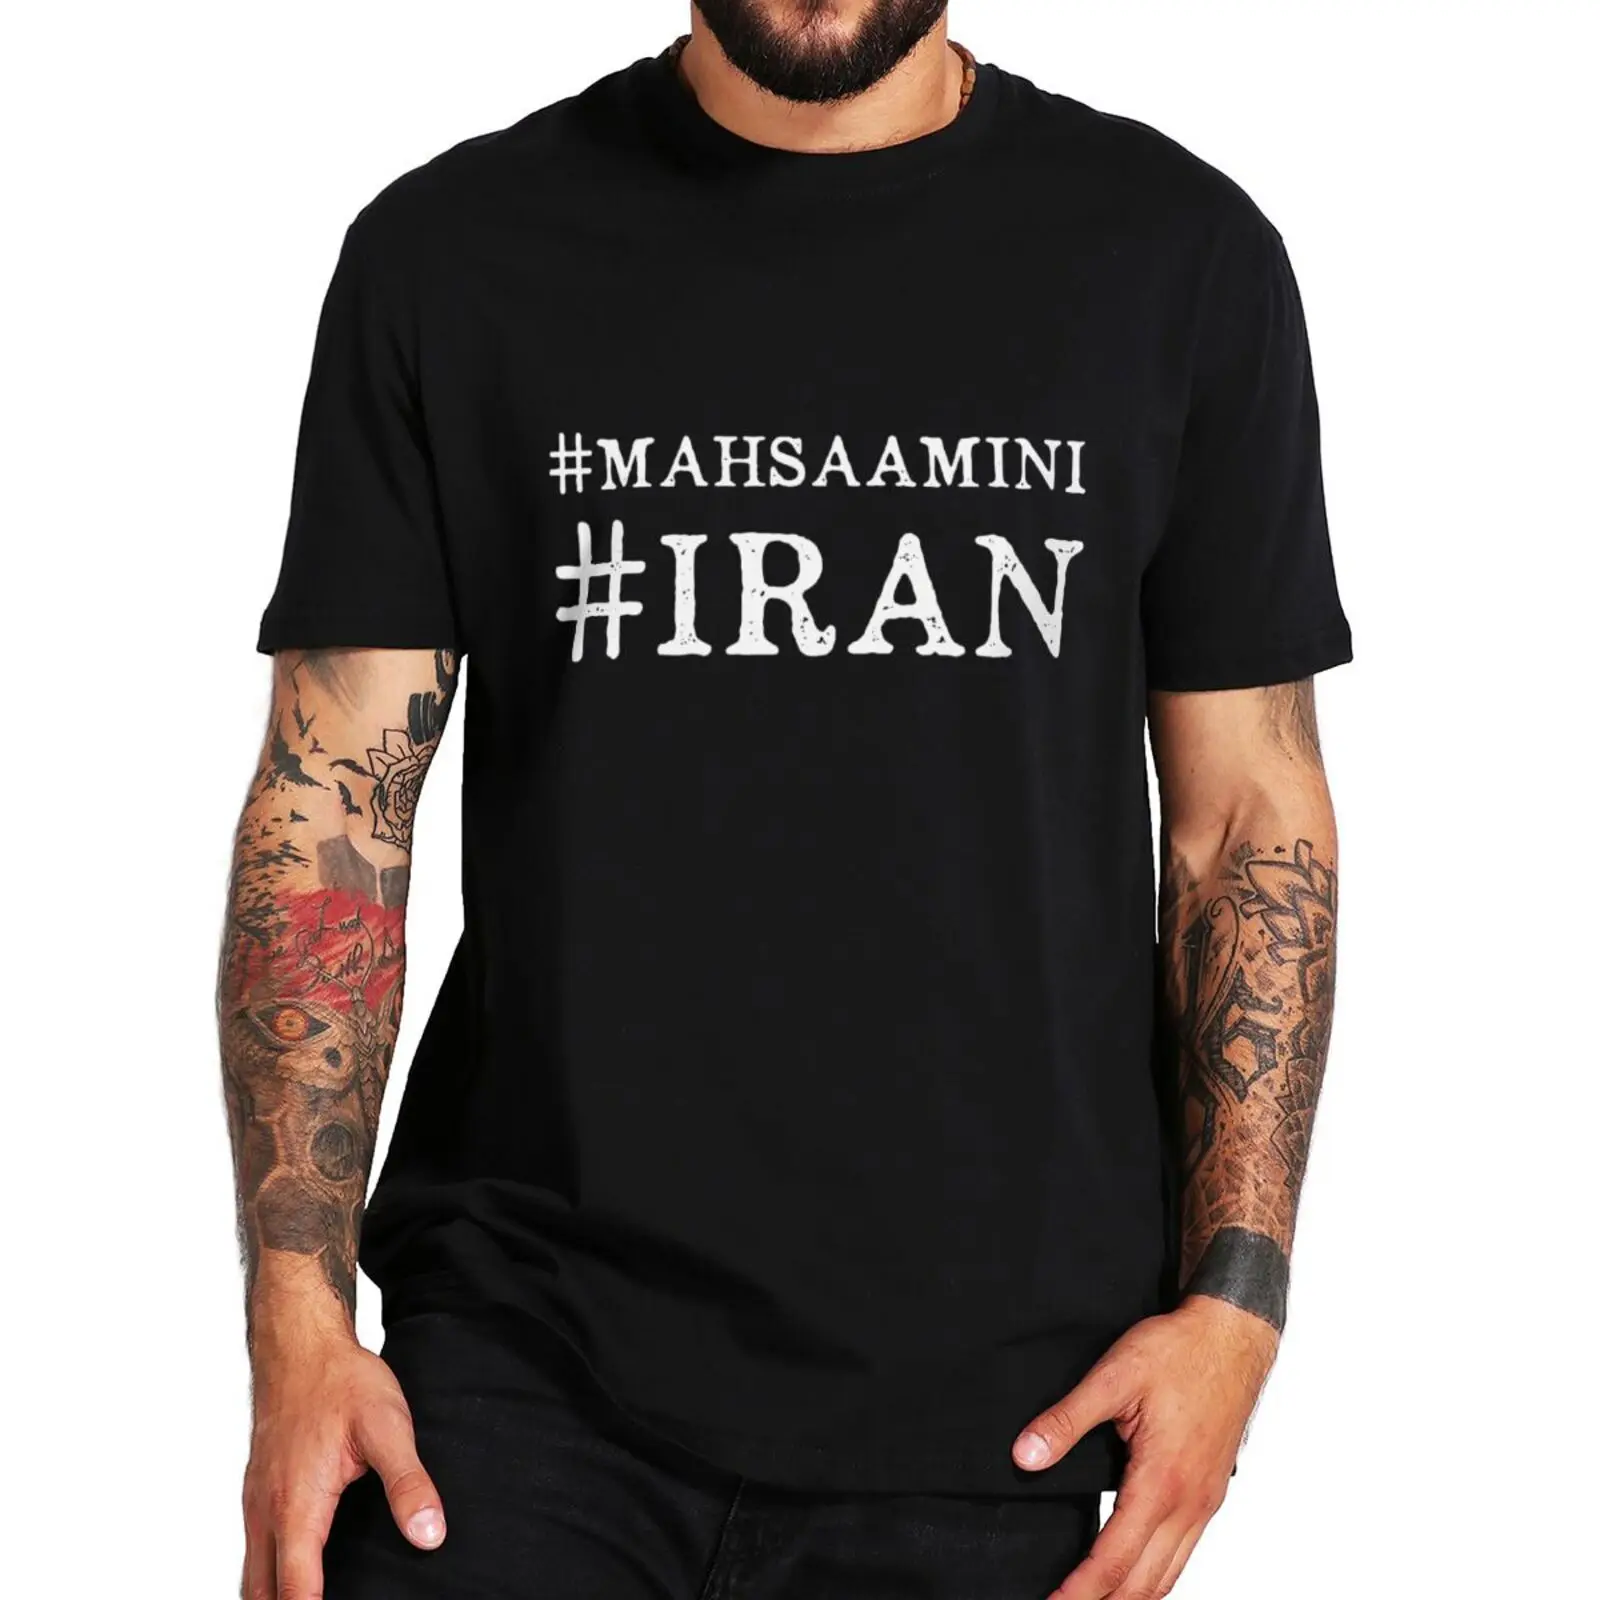 

Mahsaamini Iran T Shirt 2022 Support Female Rights Vintage T-shirts For Men Women Casual Cotton Soft Unisex Tee Tops EU Size